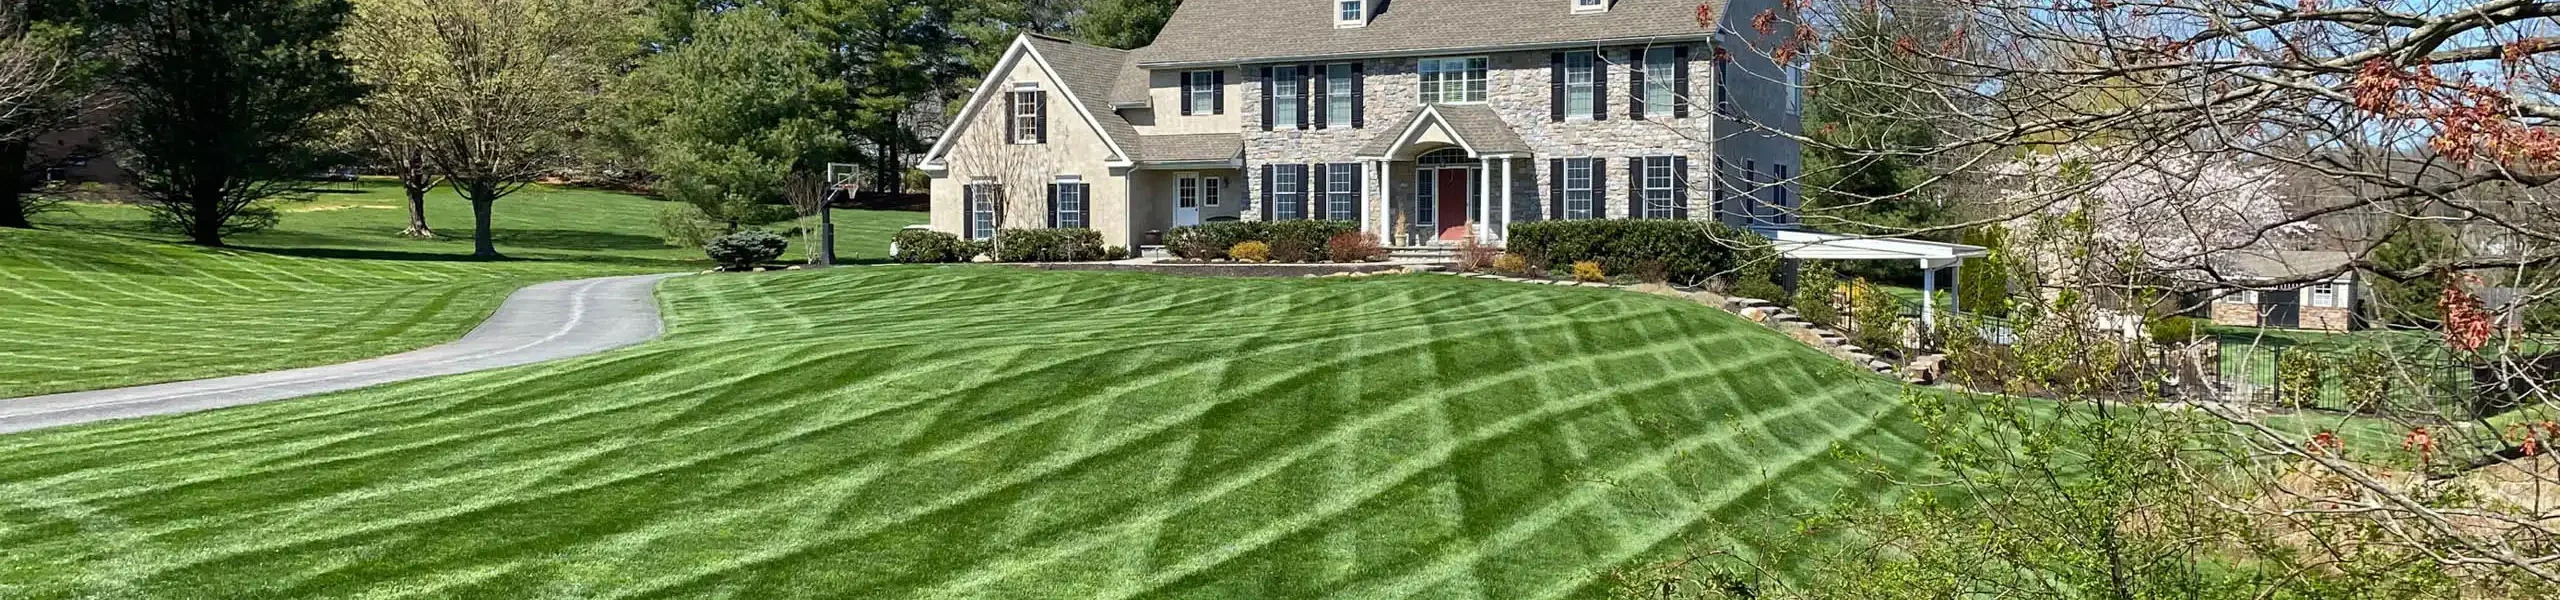 West Chester, PA Landscaping Companies